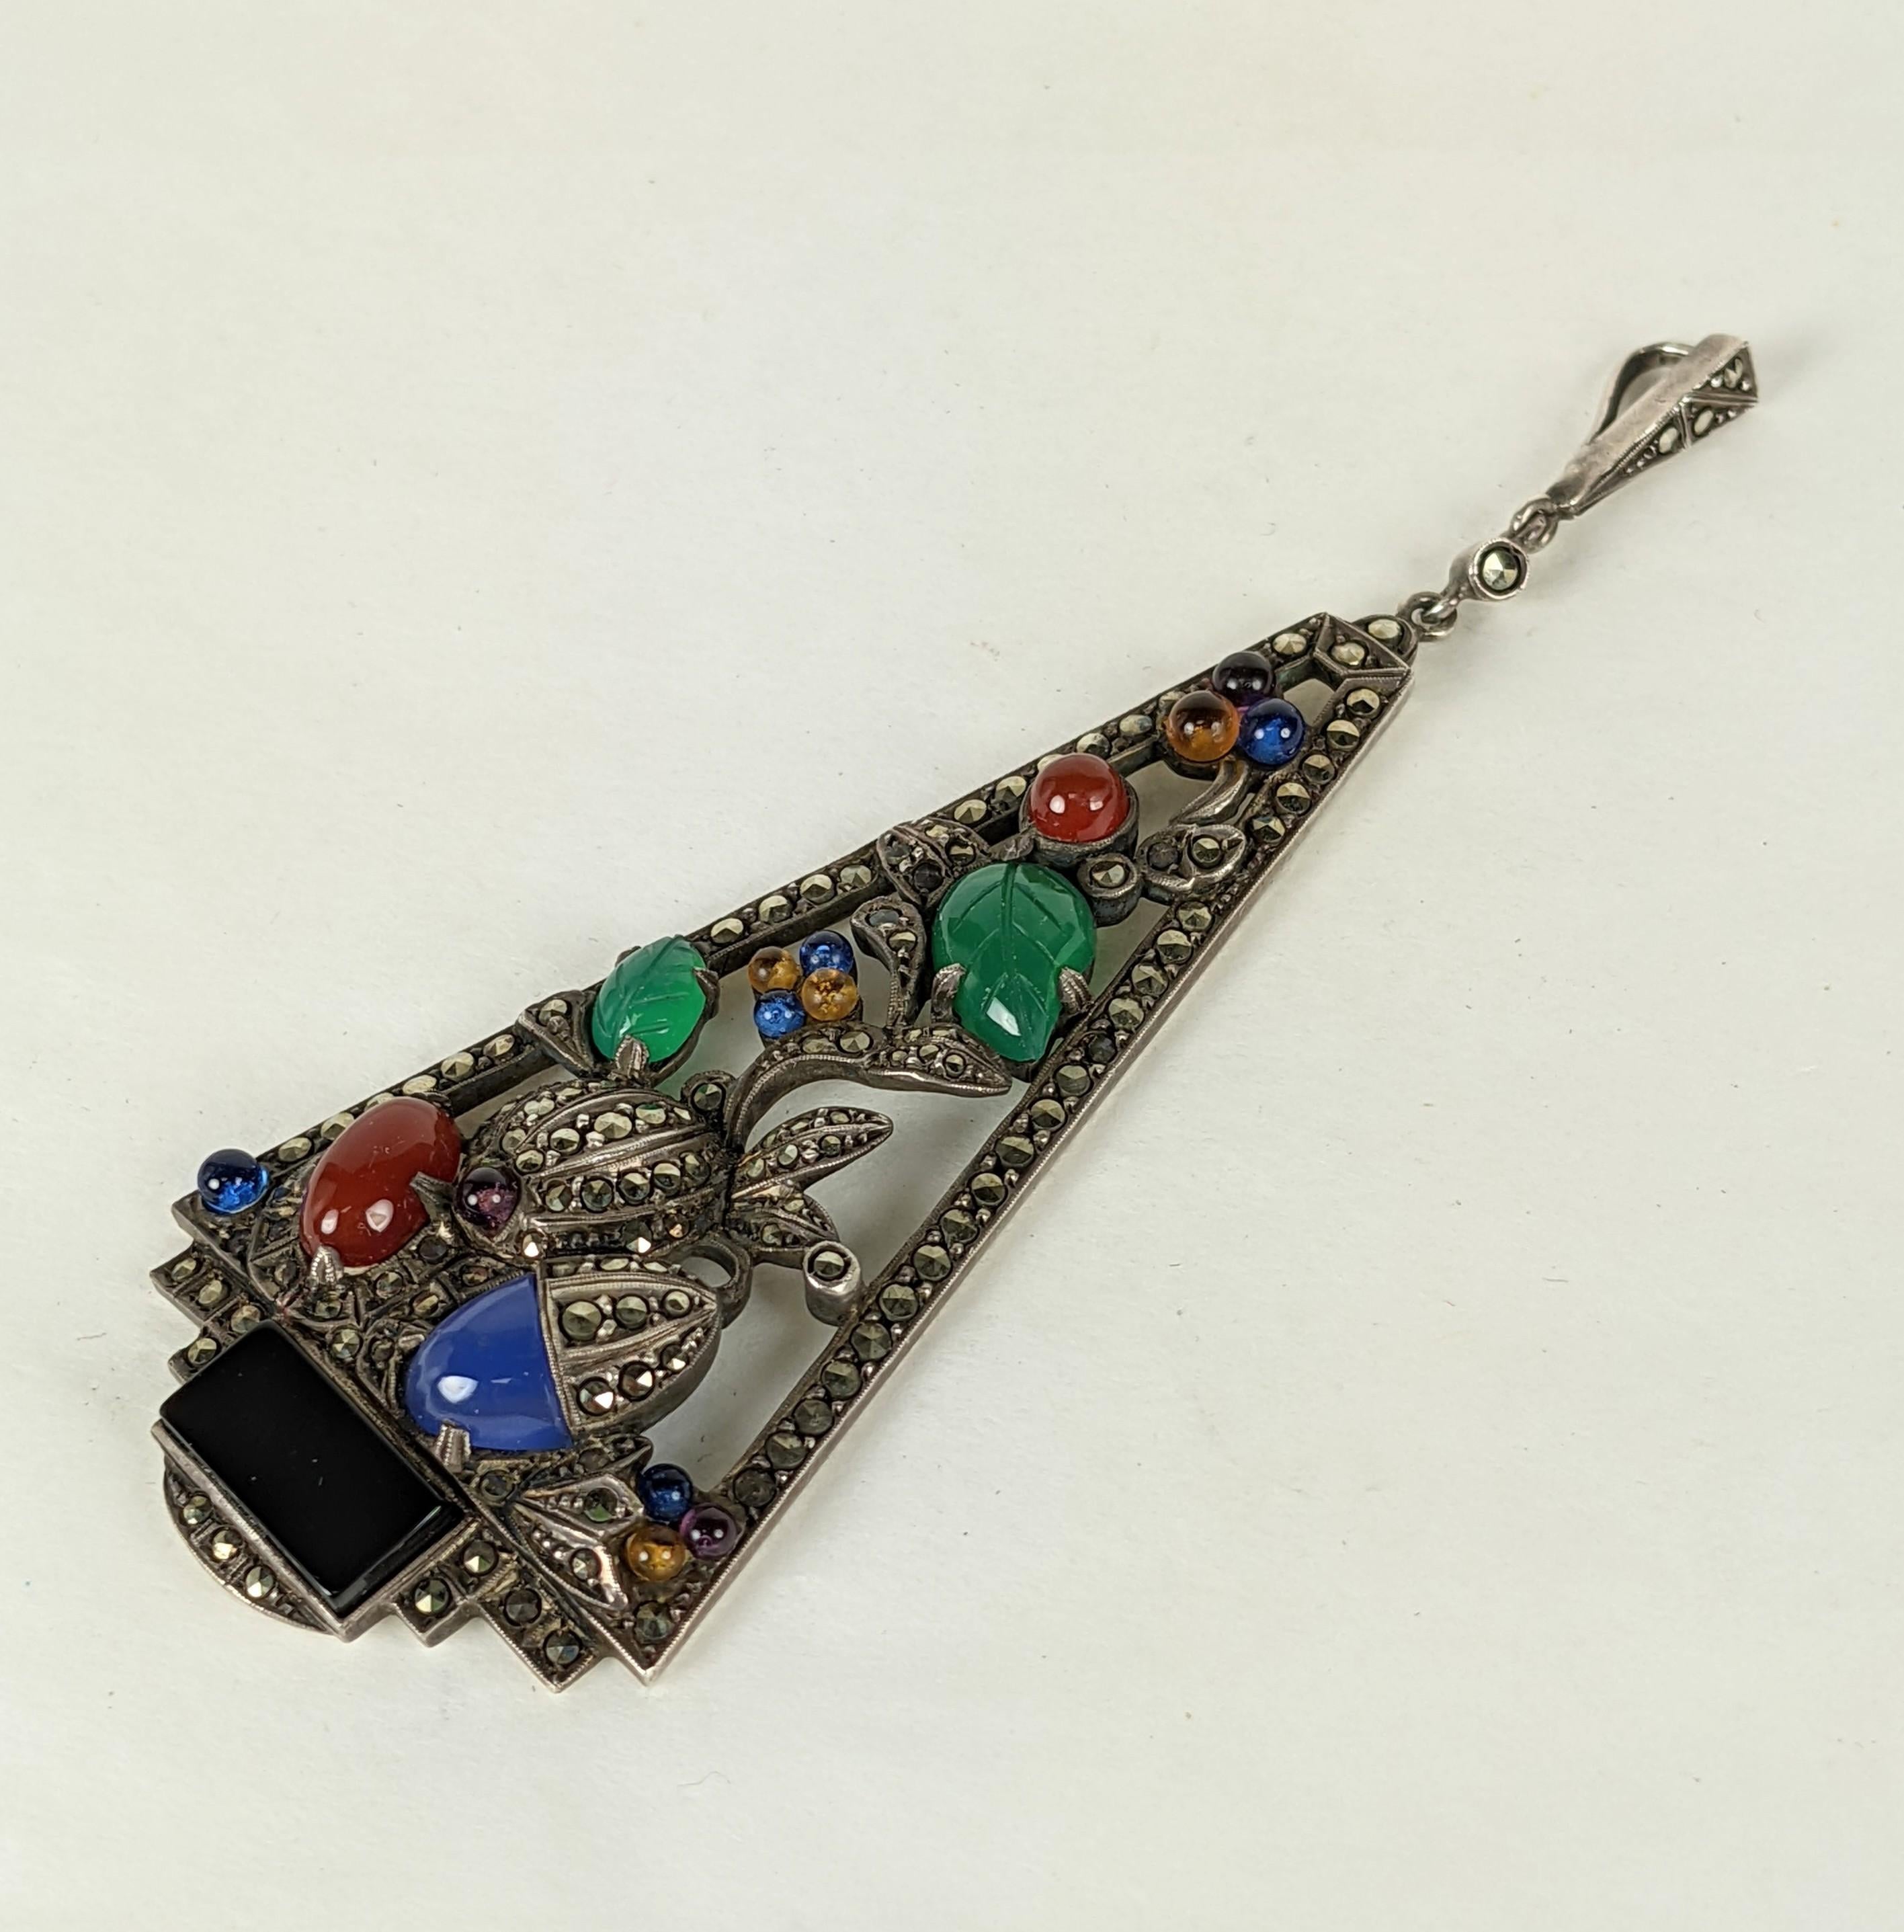 High Quality Art Deco Marcasite and Carved Stone Pendant in the Tutti Frutti style. Large scale pendant in sterling silver with carnelian, carved green onyx, chalcedony and onyx with pate de verre colored glass balls, all edged in marcasites.